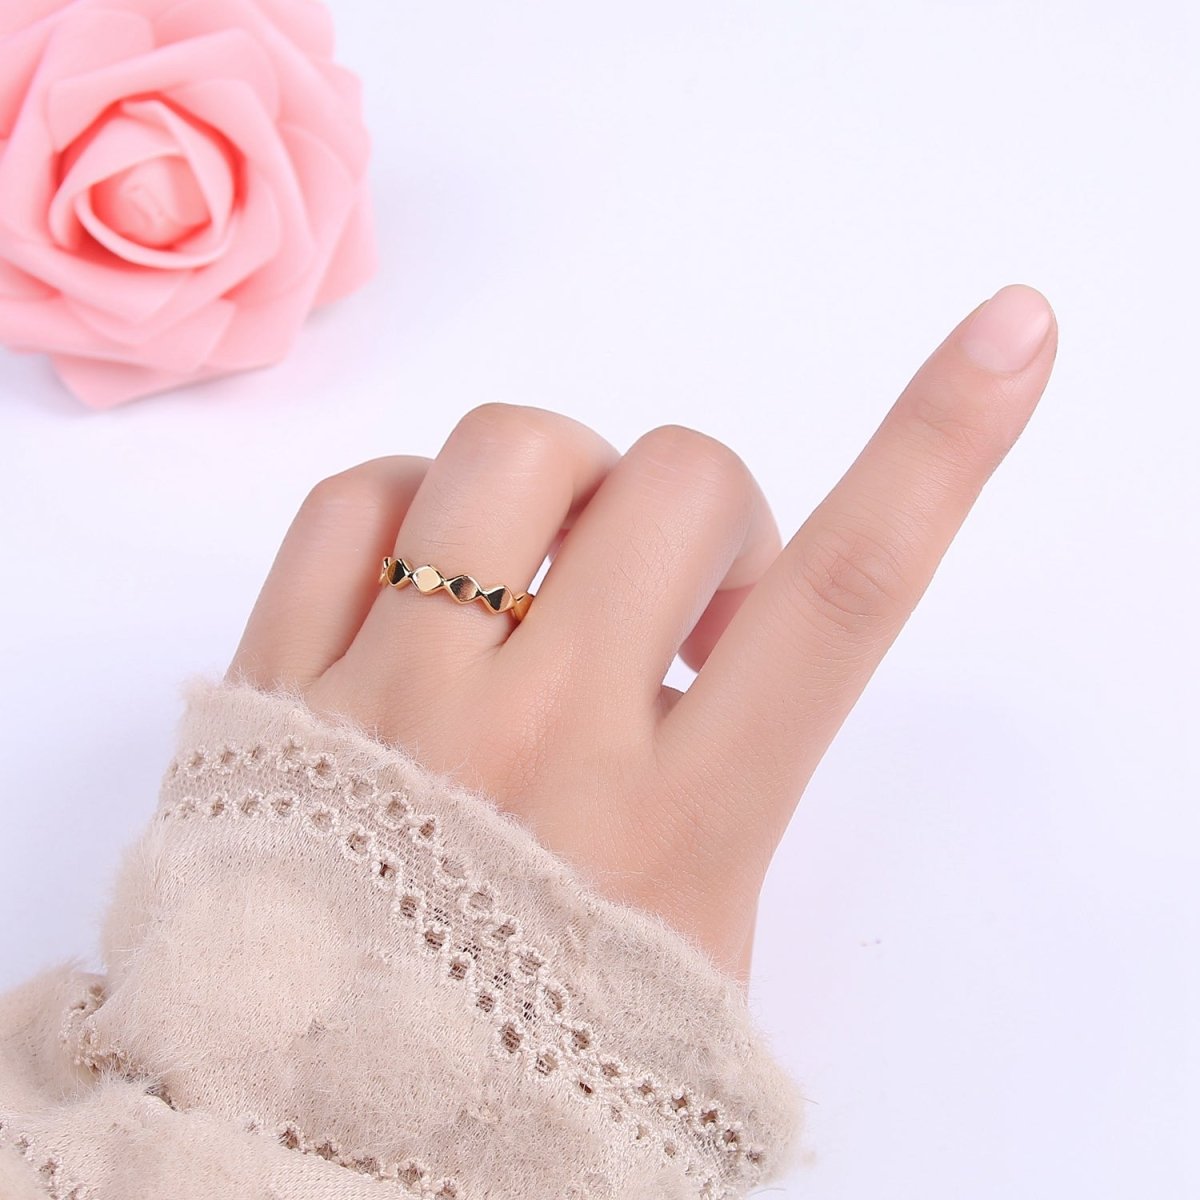 OS Minimalist Diamond Shaped Ring, Geometric Abstract Stacking Ring, Dainty 16K Gold Filled Shiny Gold Statement Adjustable Ring U-431 - DLUXCA